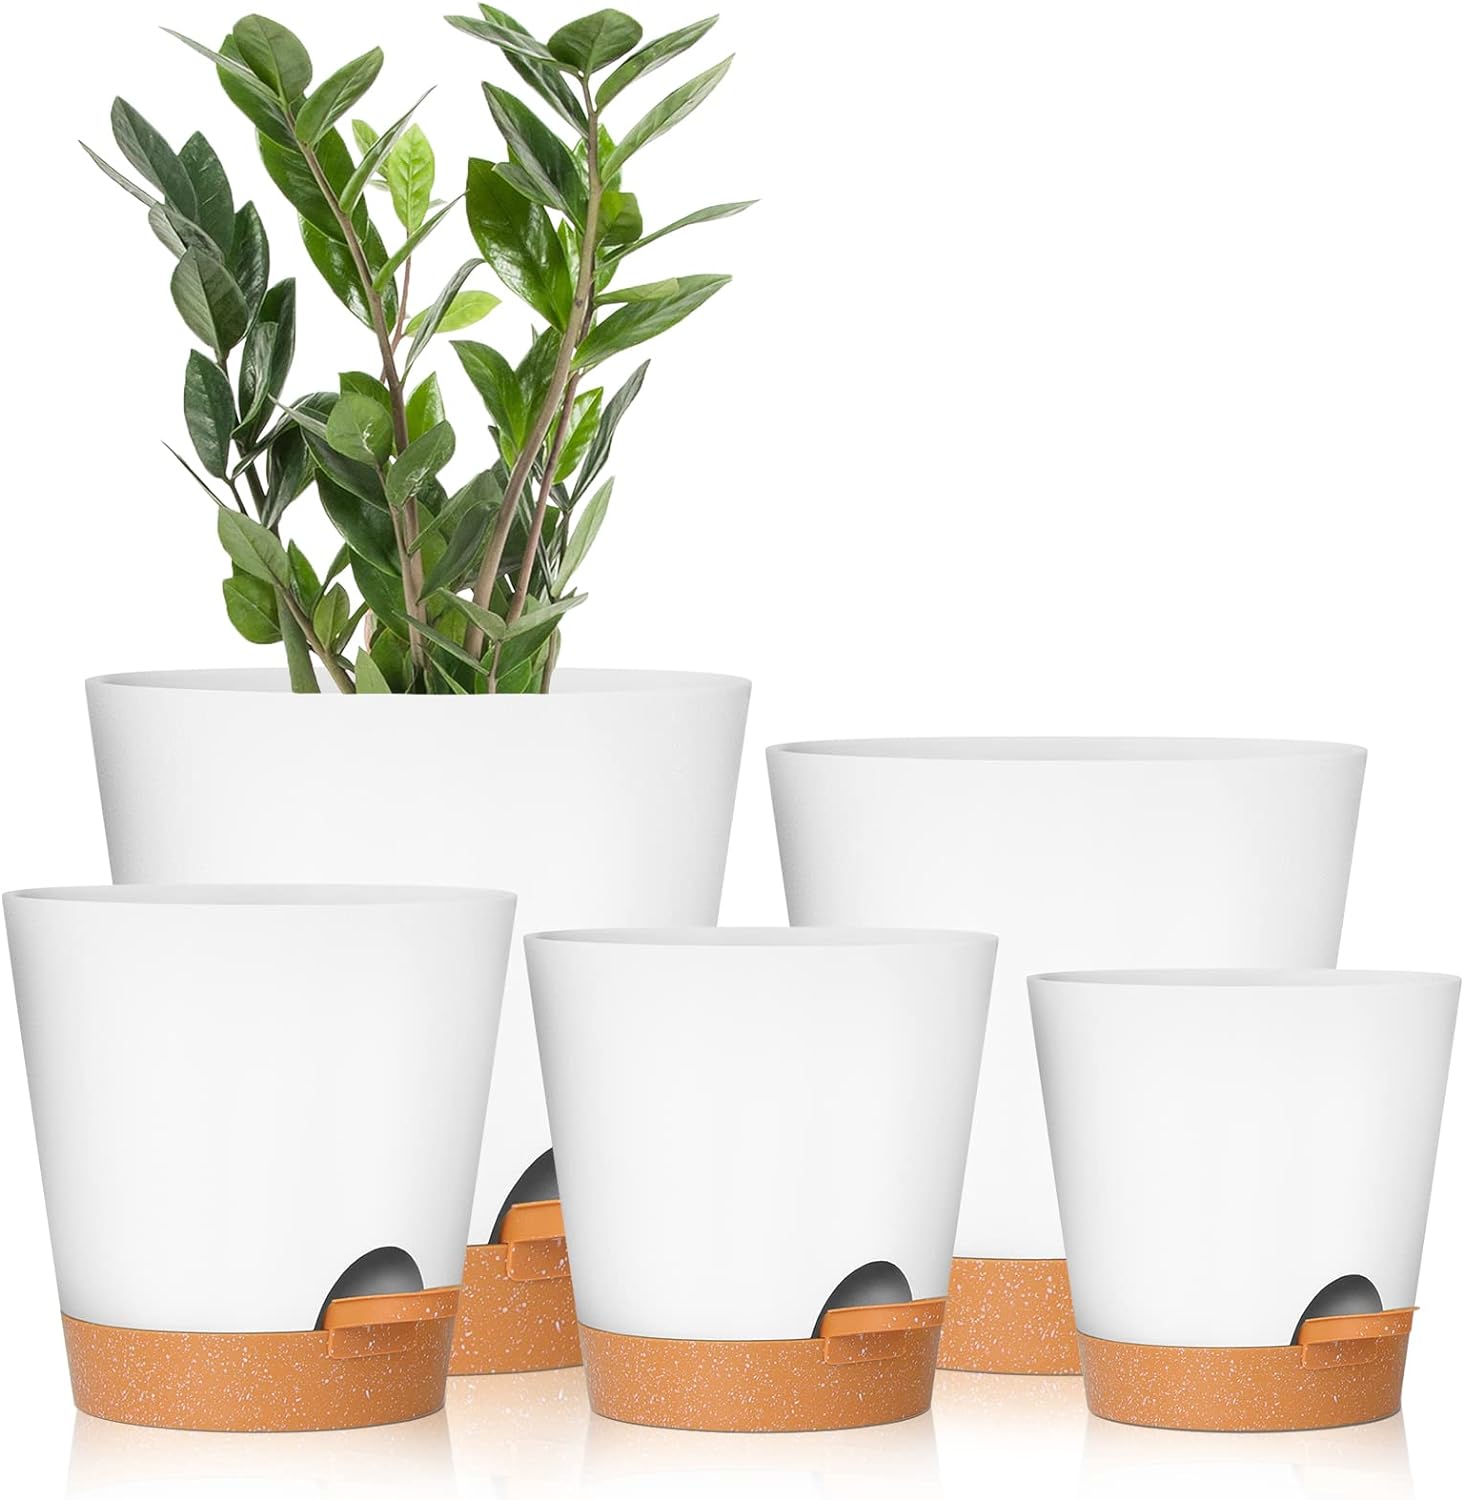 GARDIFE Plant Pots 7/6.5/6/5.5/5 Inch Self Watering Planters with Drainage Hole, Plastic Flower Pots, Nursery Planting Pot for All House Plants, African Violet, Flowers, and Cactus,White